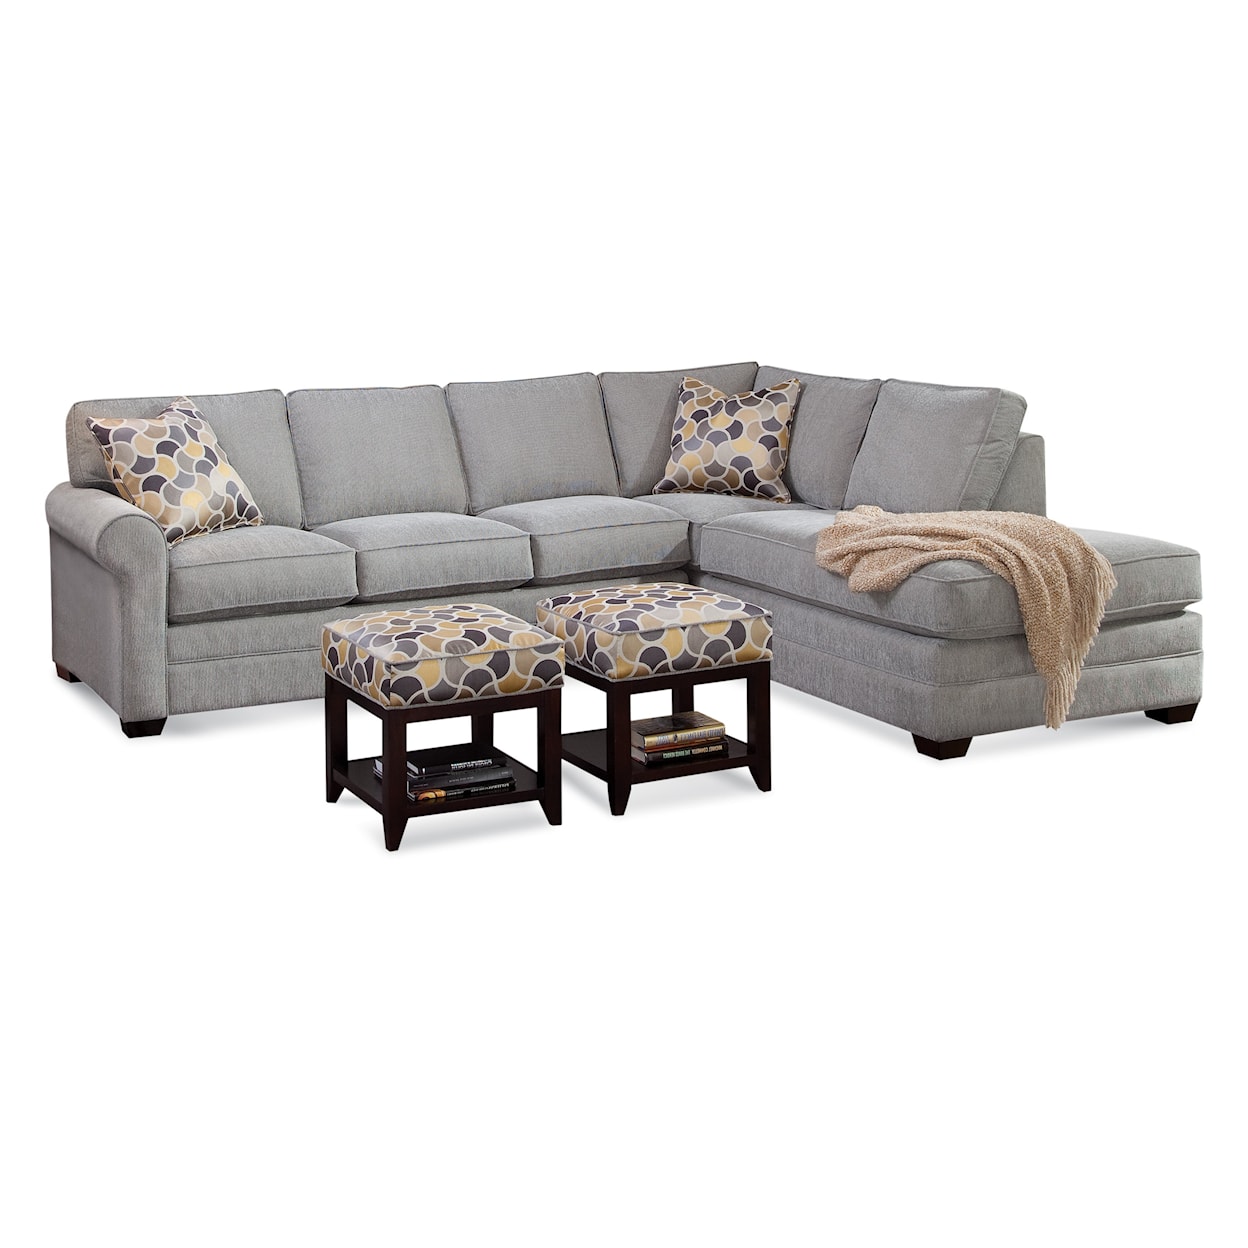 Braxton Culler Bedford Bedford Two-Piece Bumper Sleeper Sectional